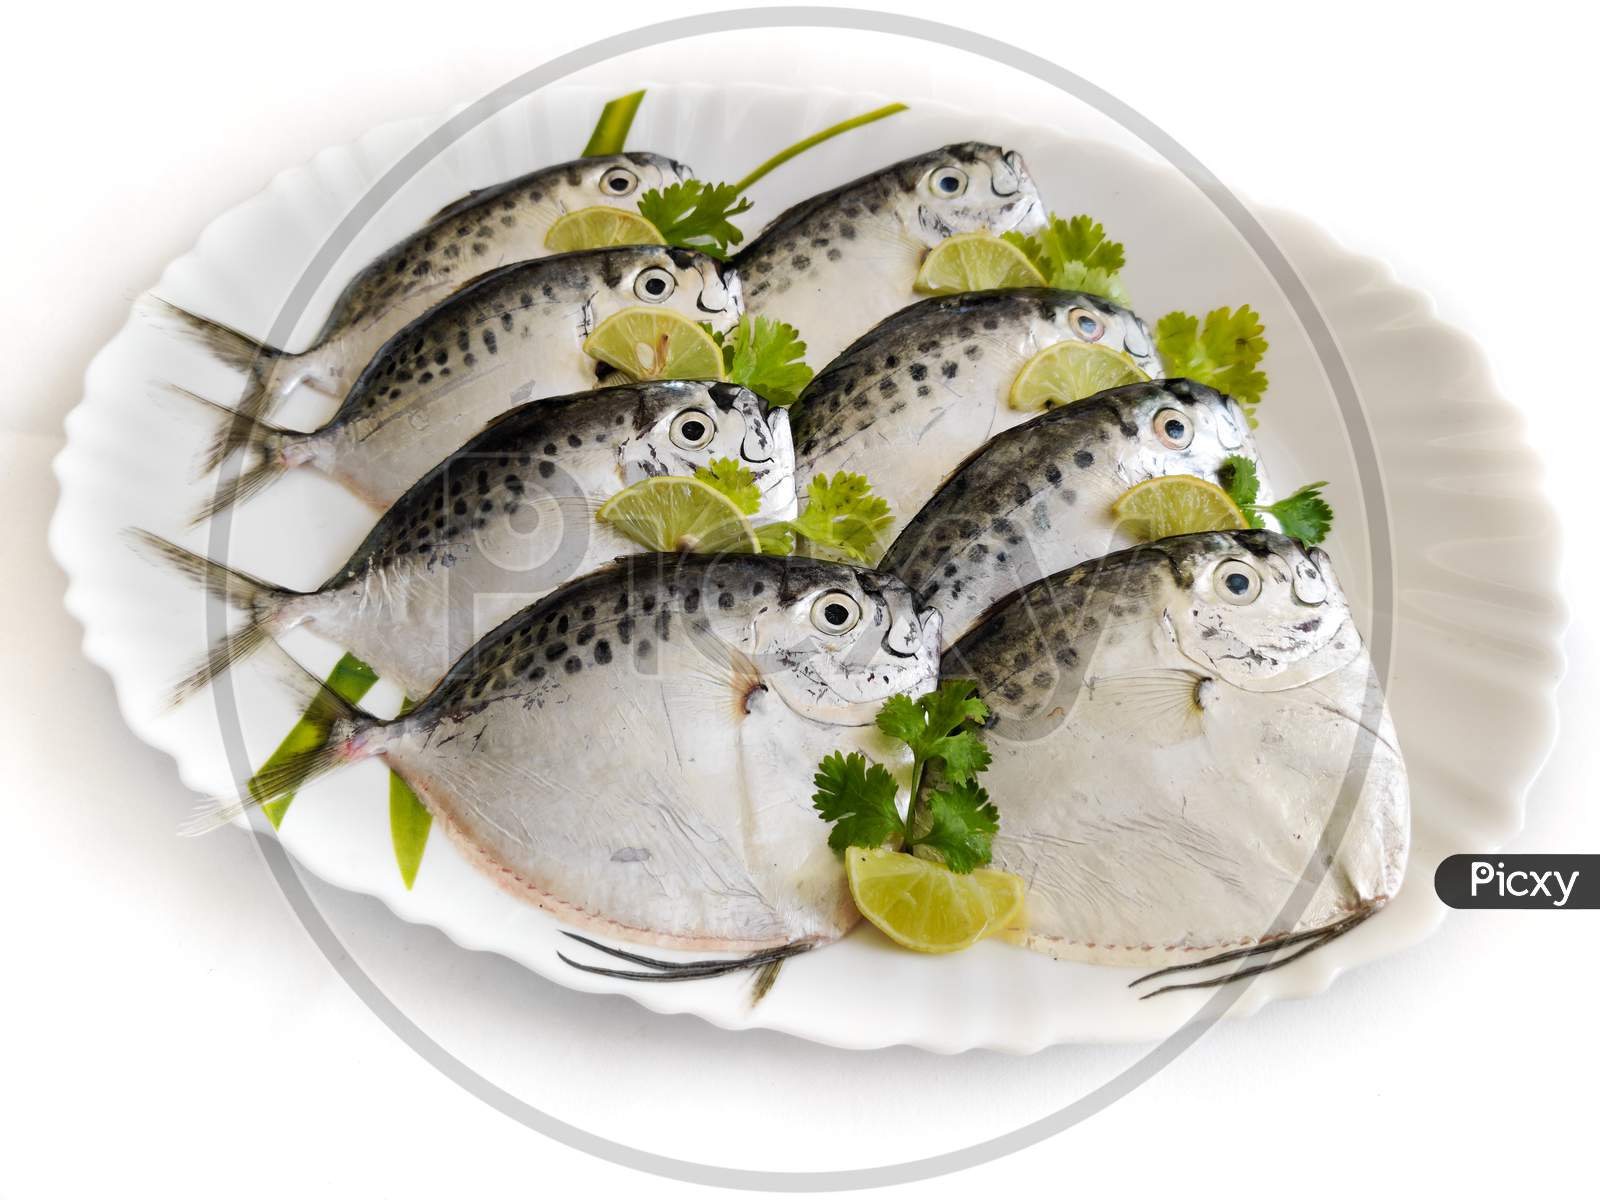 Fresh Razor Moonfish/Razor Trevally Fish, Decorated With Herbs And Lemon Slice On A White Plate.